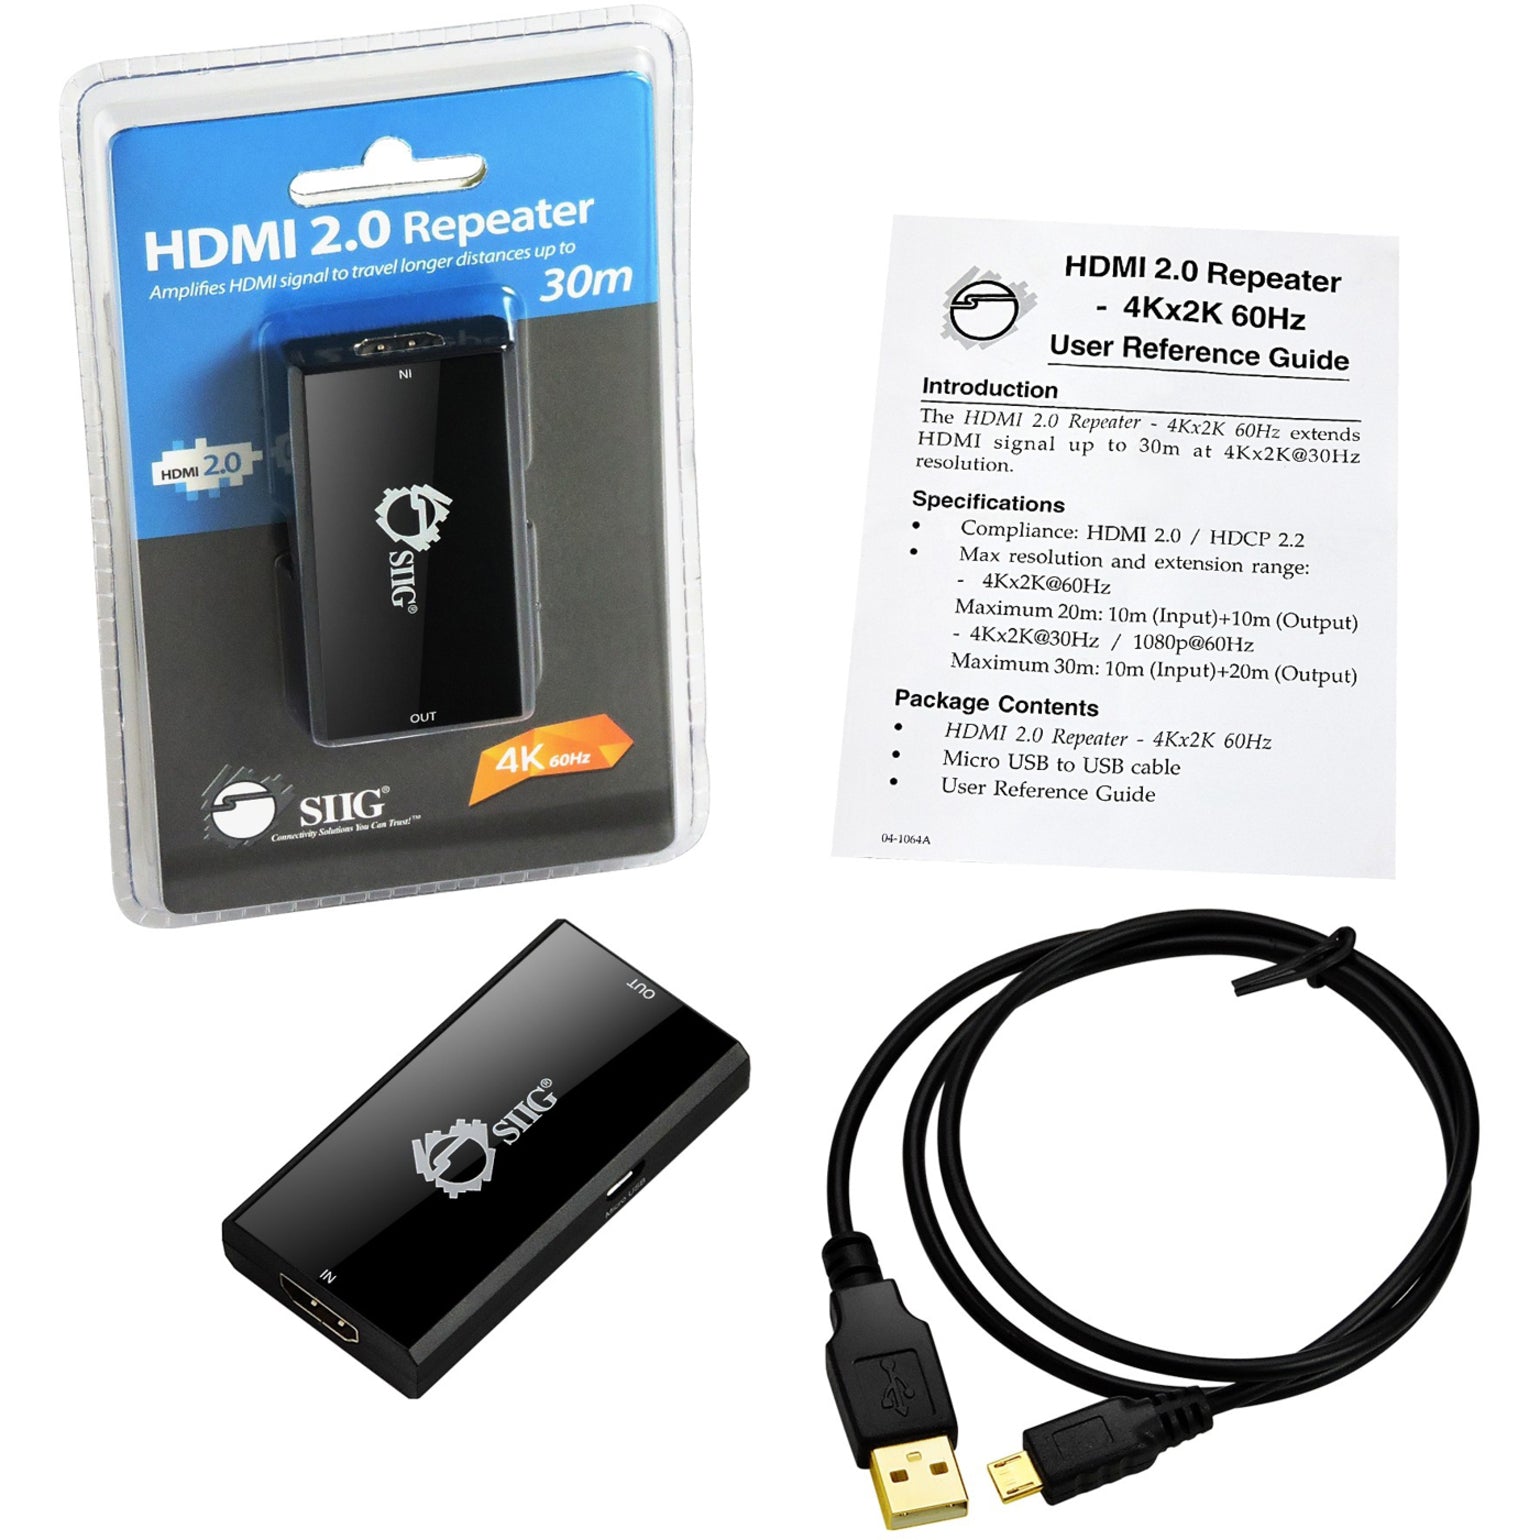 SIIG CE-H22J14-S1 HDMI 2.0 Repeater - 4Kx2K 60Hz USB RoHS Certified